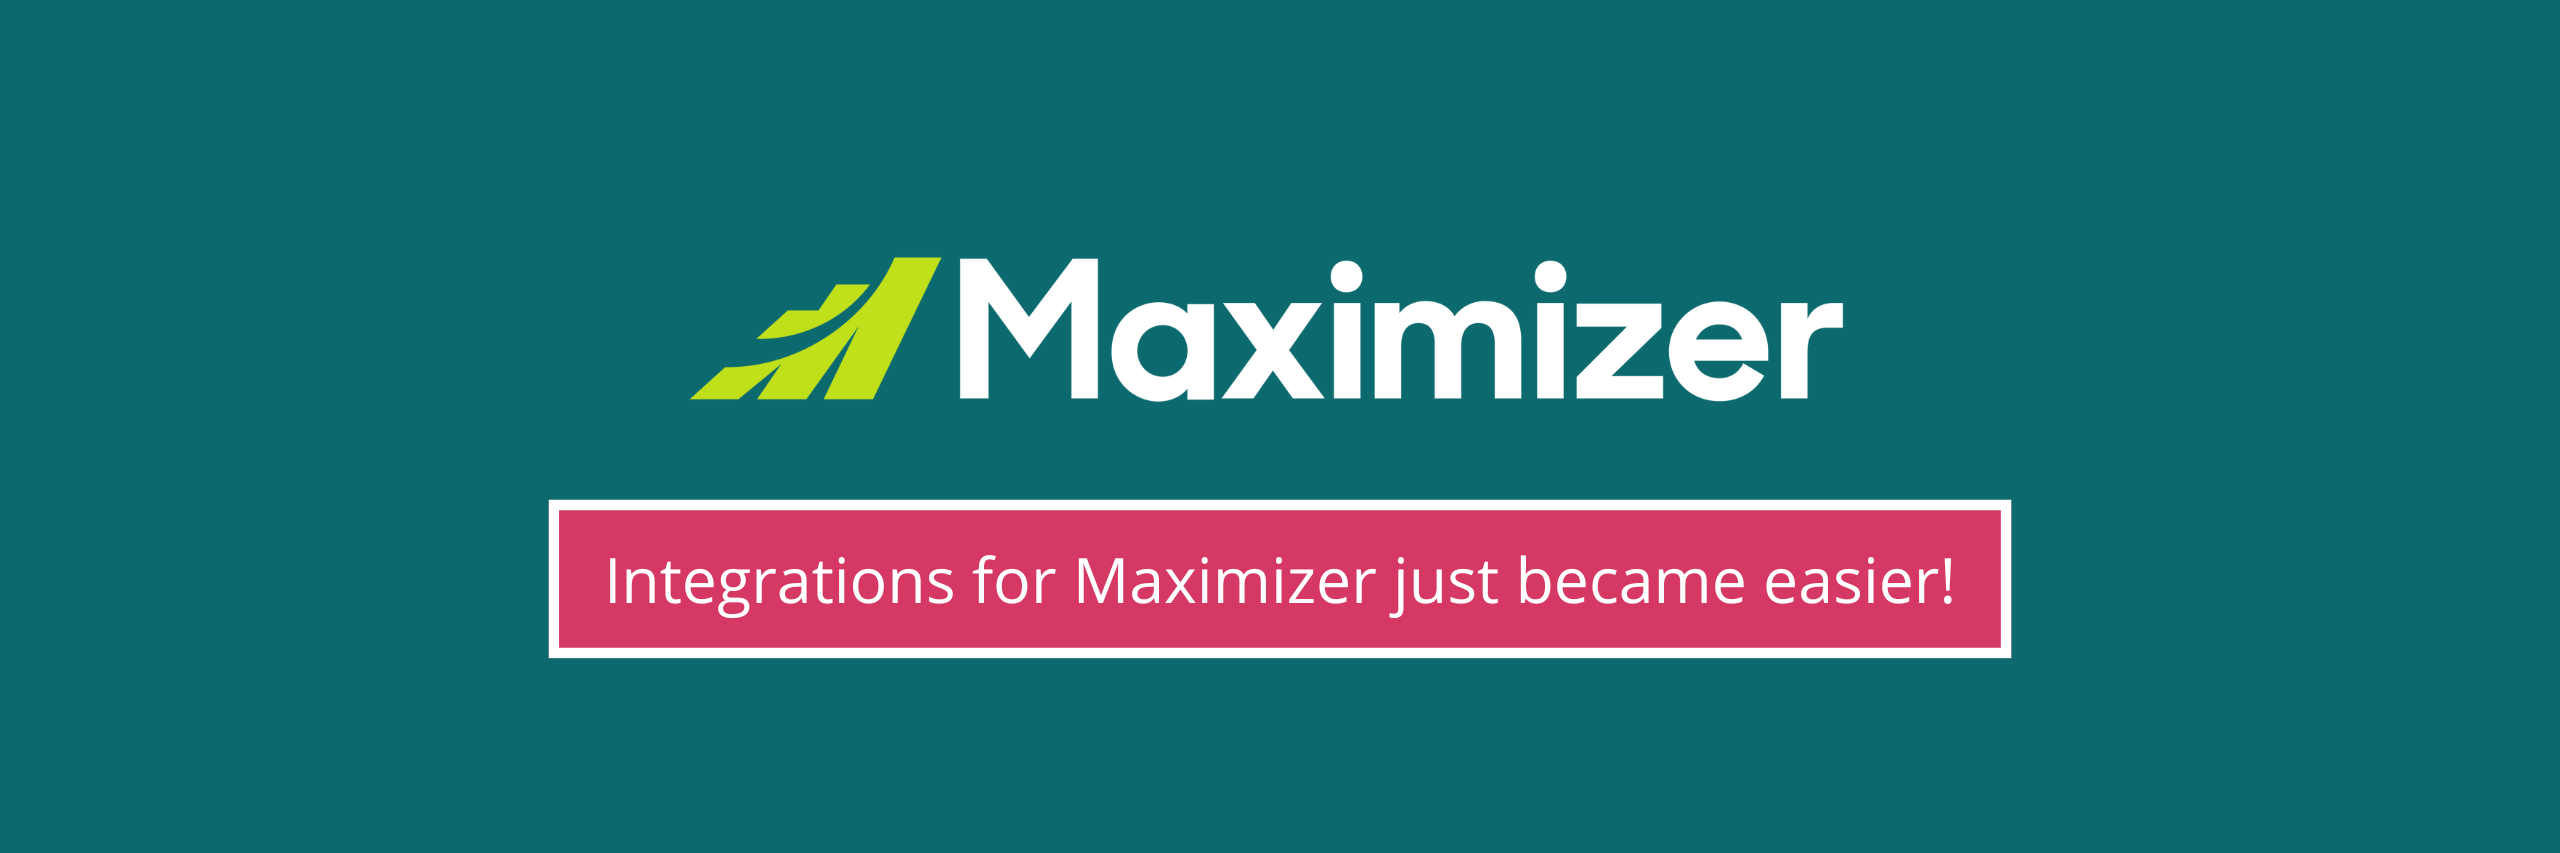 Integrations for Maximizer just became easier!